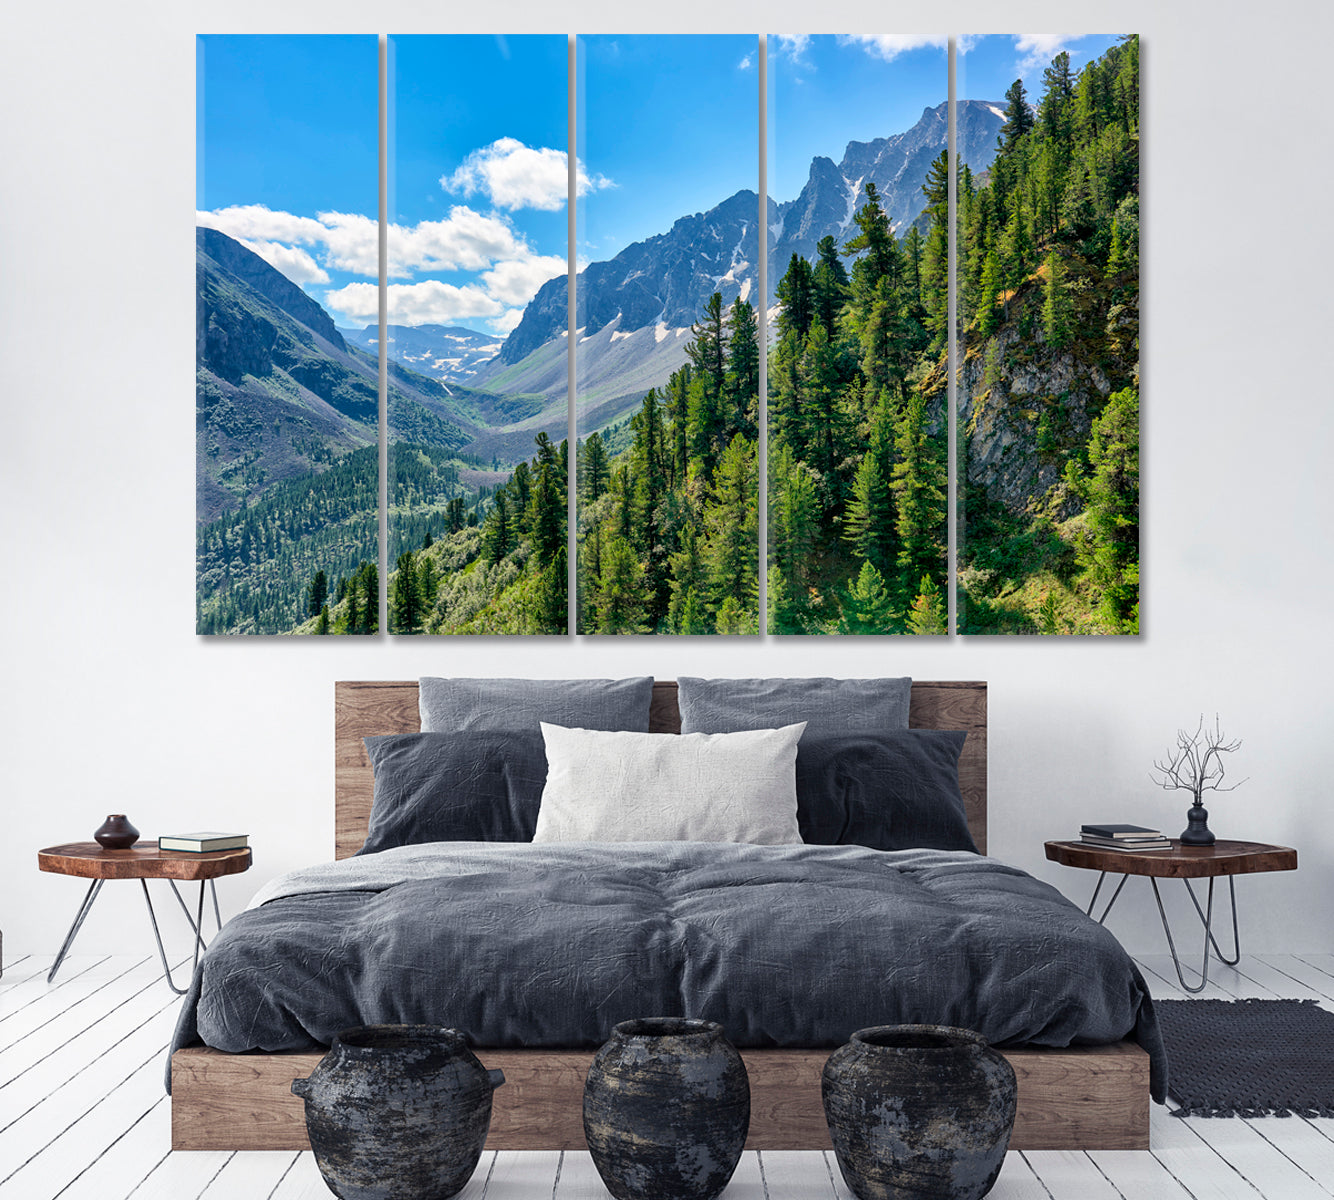 Pine Forest on Mountainside Canvas Print ArtLexy 5 Panels 36"x24" inches 